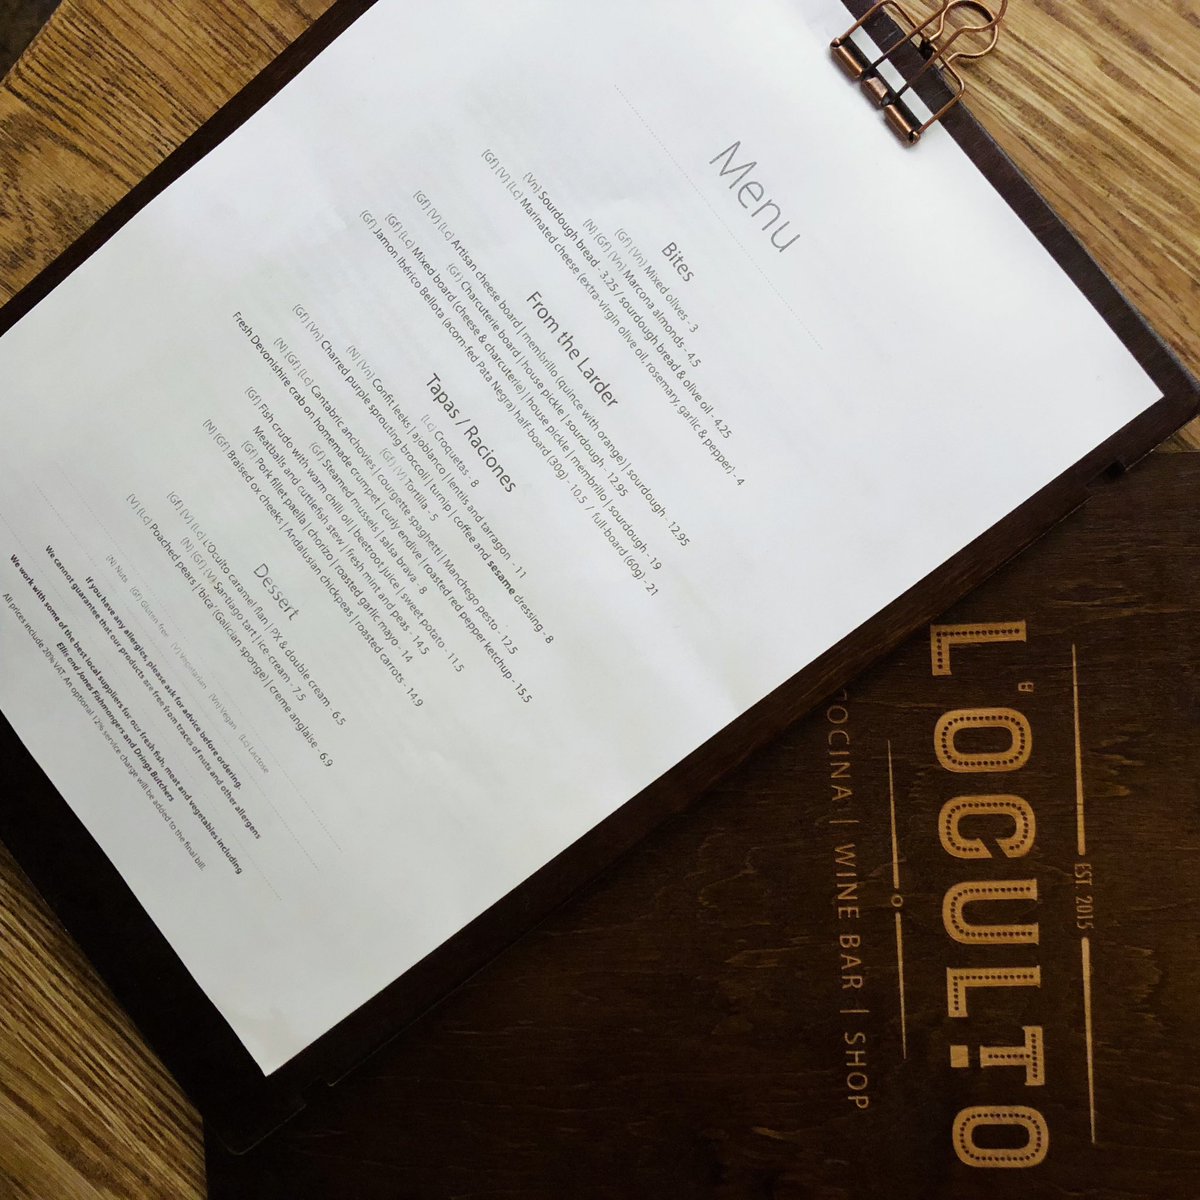 Join us this Sunday for Mothers Day lunch. Kitchen open from 12:30-15:30 serving a delicious full menu… book online at loculto.co.uk using ResDiary 
#mothersday #loculto #se4 #brockley #neighbourhoodrestaurant #local